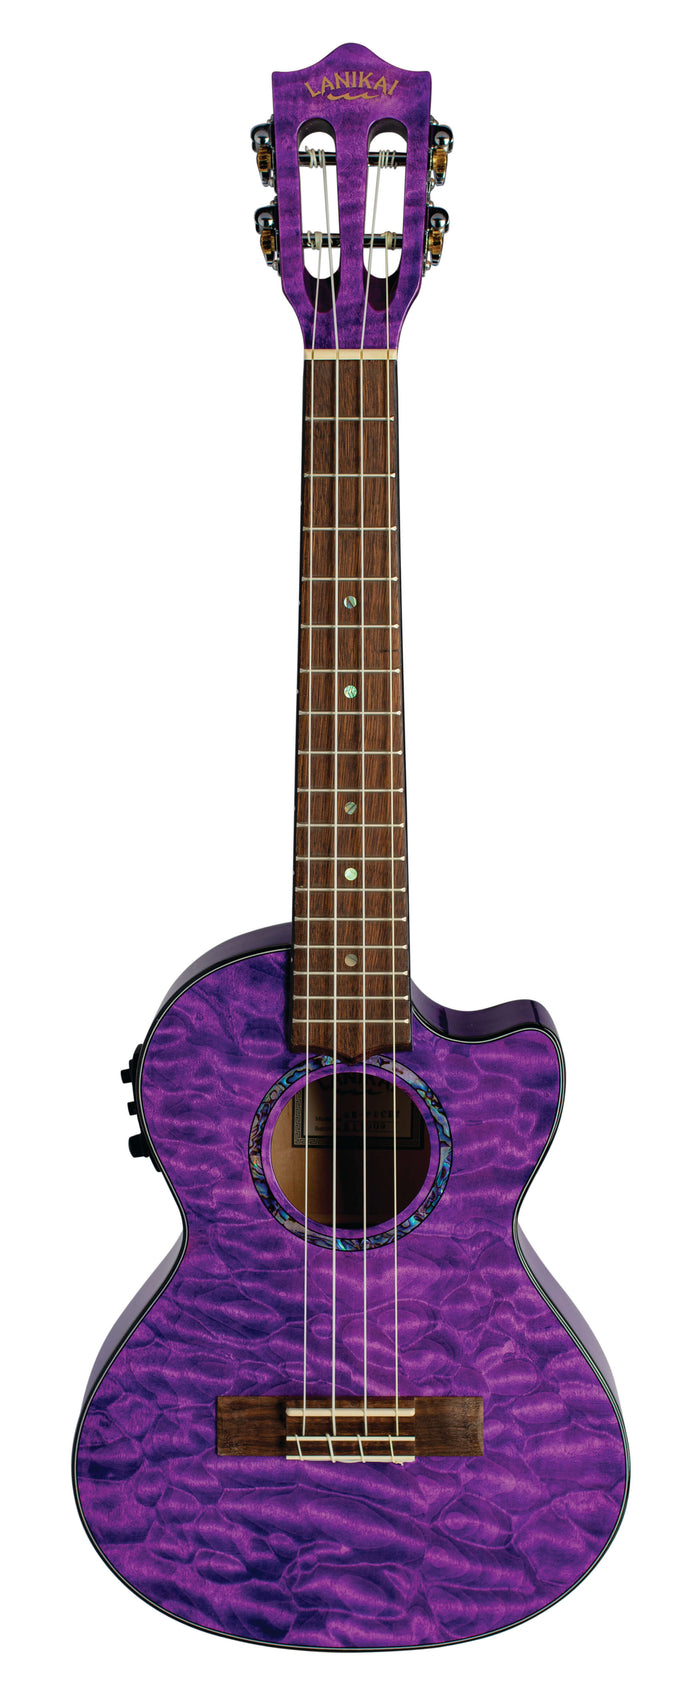 Lanikai Quilted Maple Purple Stain Tenor Cutaway with Fishman Kula Preamp and tuner A/E Ukulele